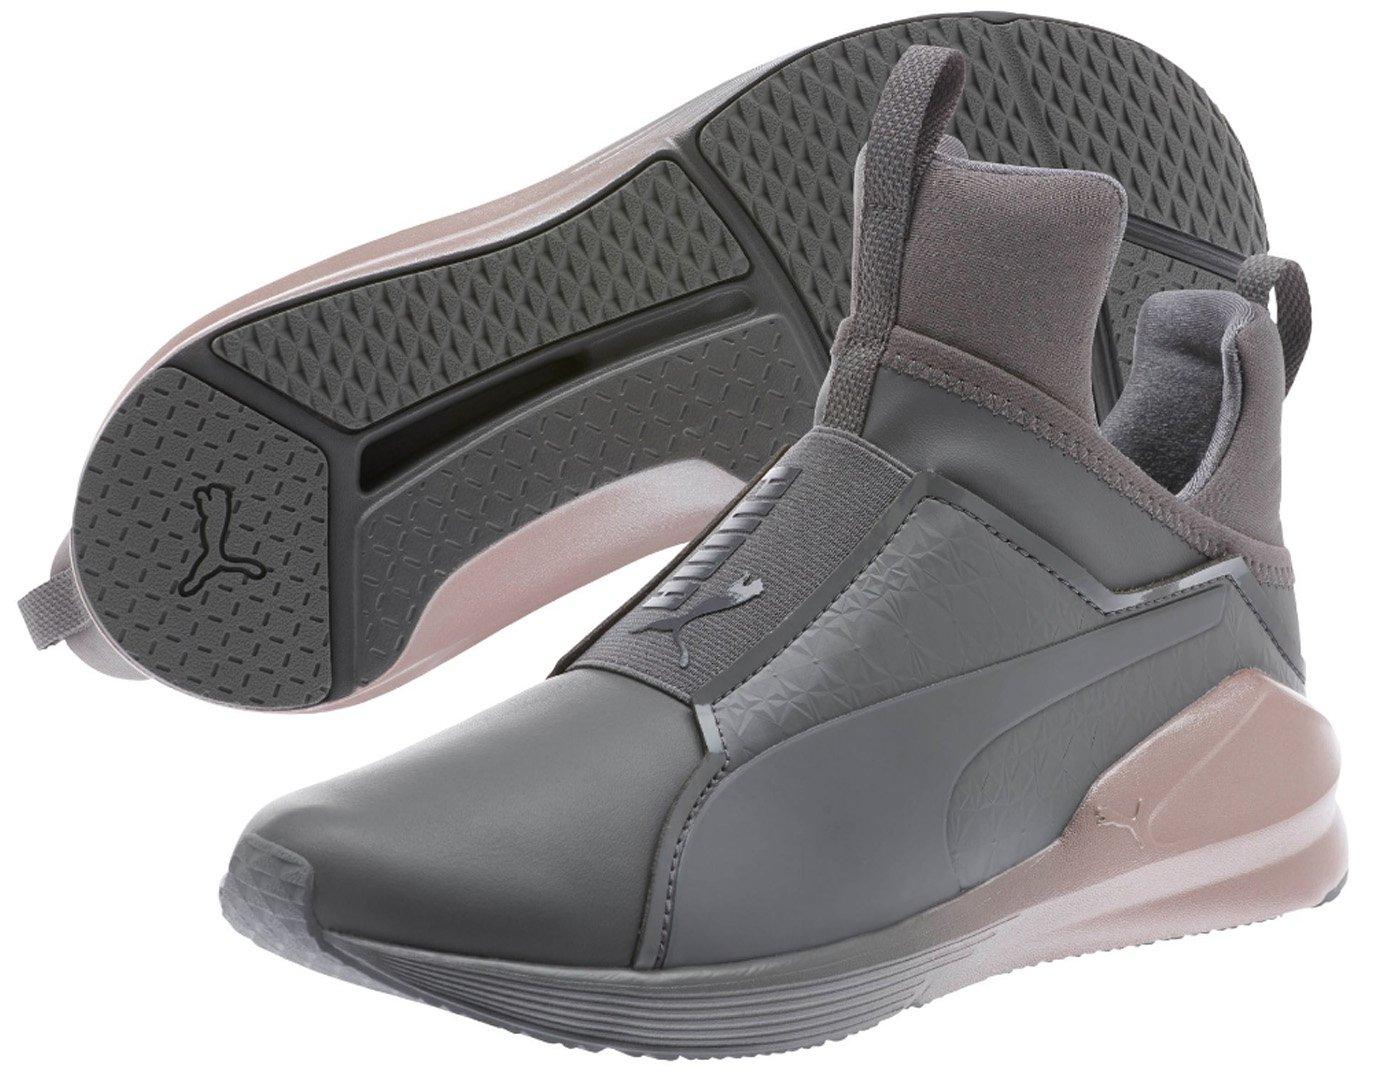 PUMA Synthetic Fierce Chalet 's Sneaker Shoes Quiet Shade Rose Gold  190914-04 in Gray - Lyst